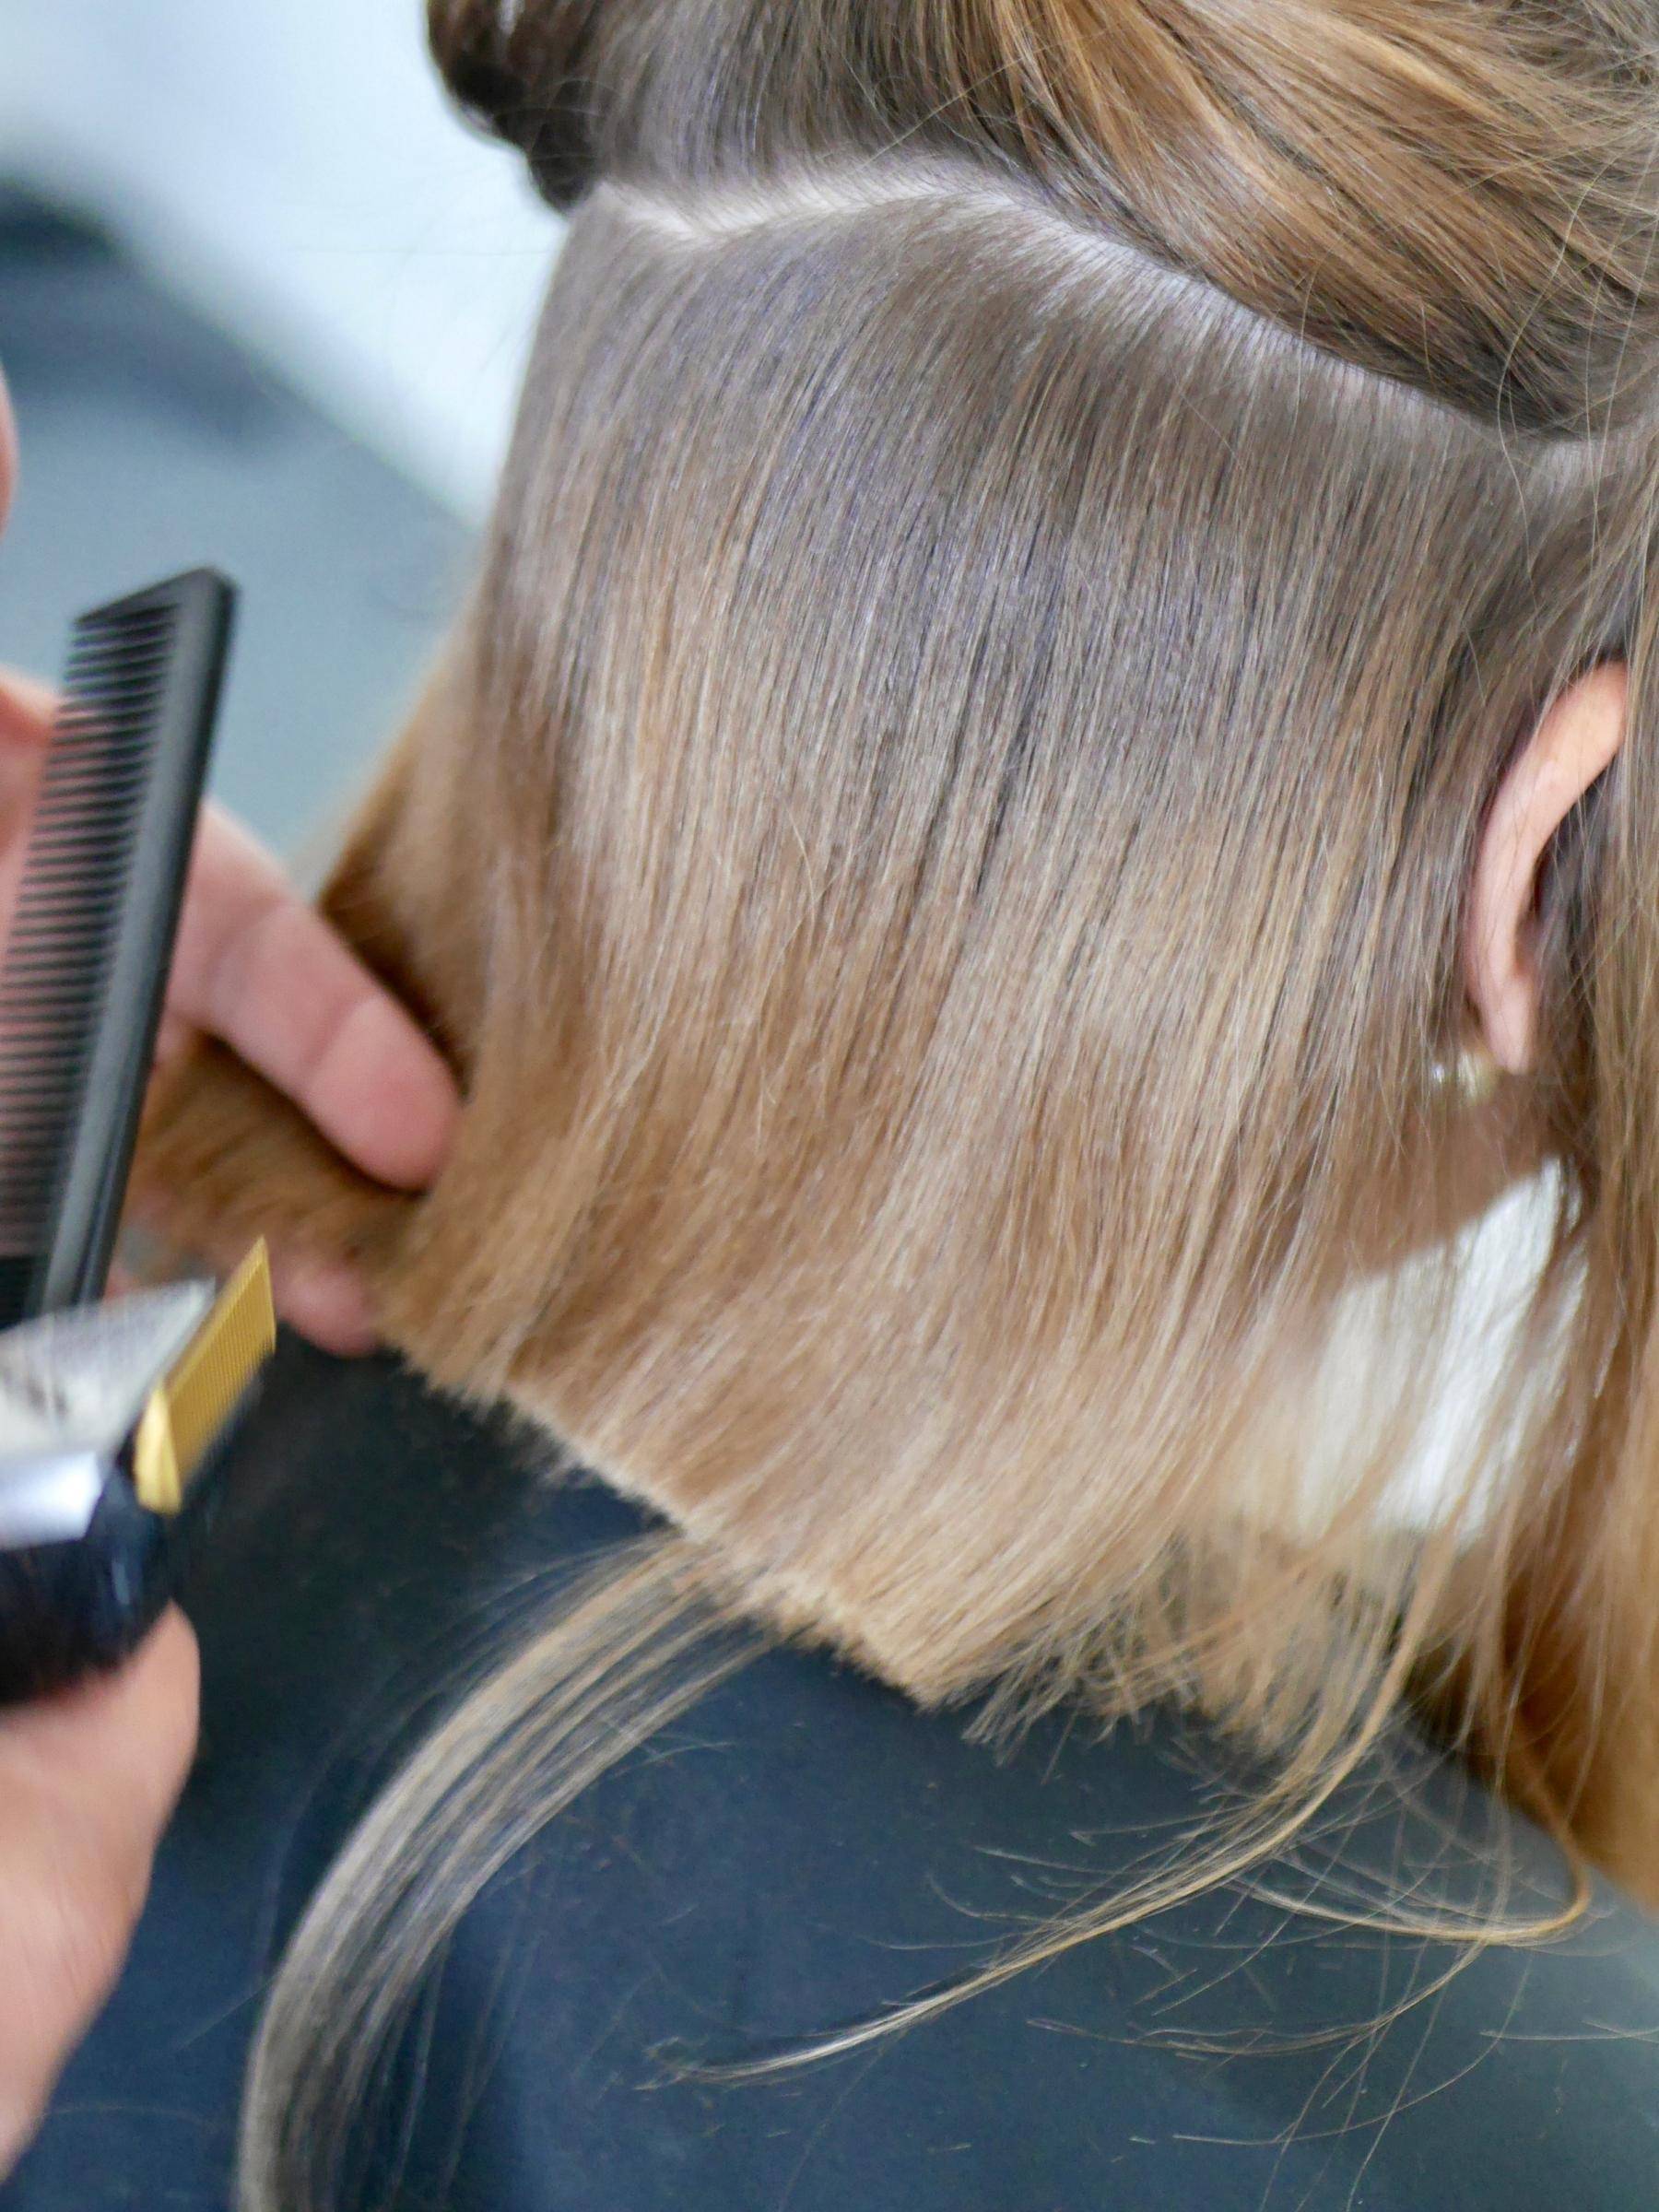 The best haircuts for women: How should you choose?